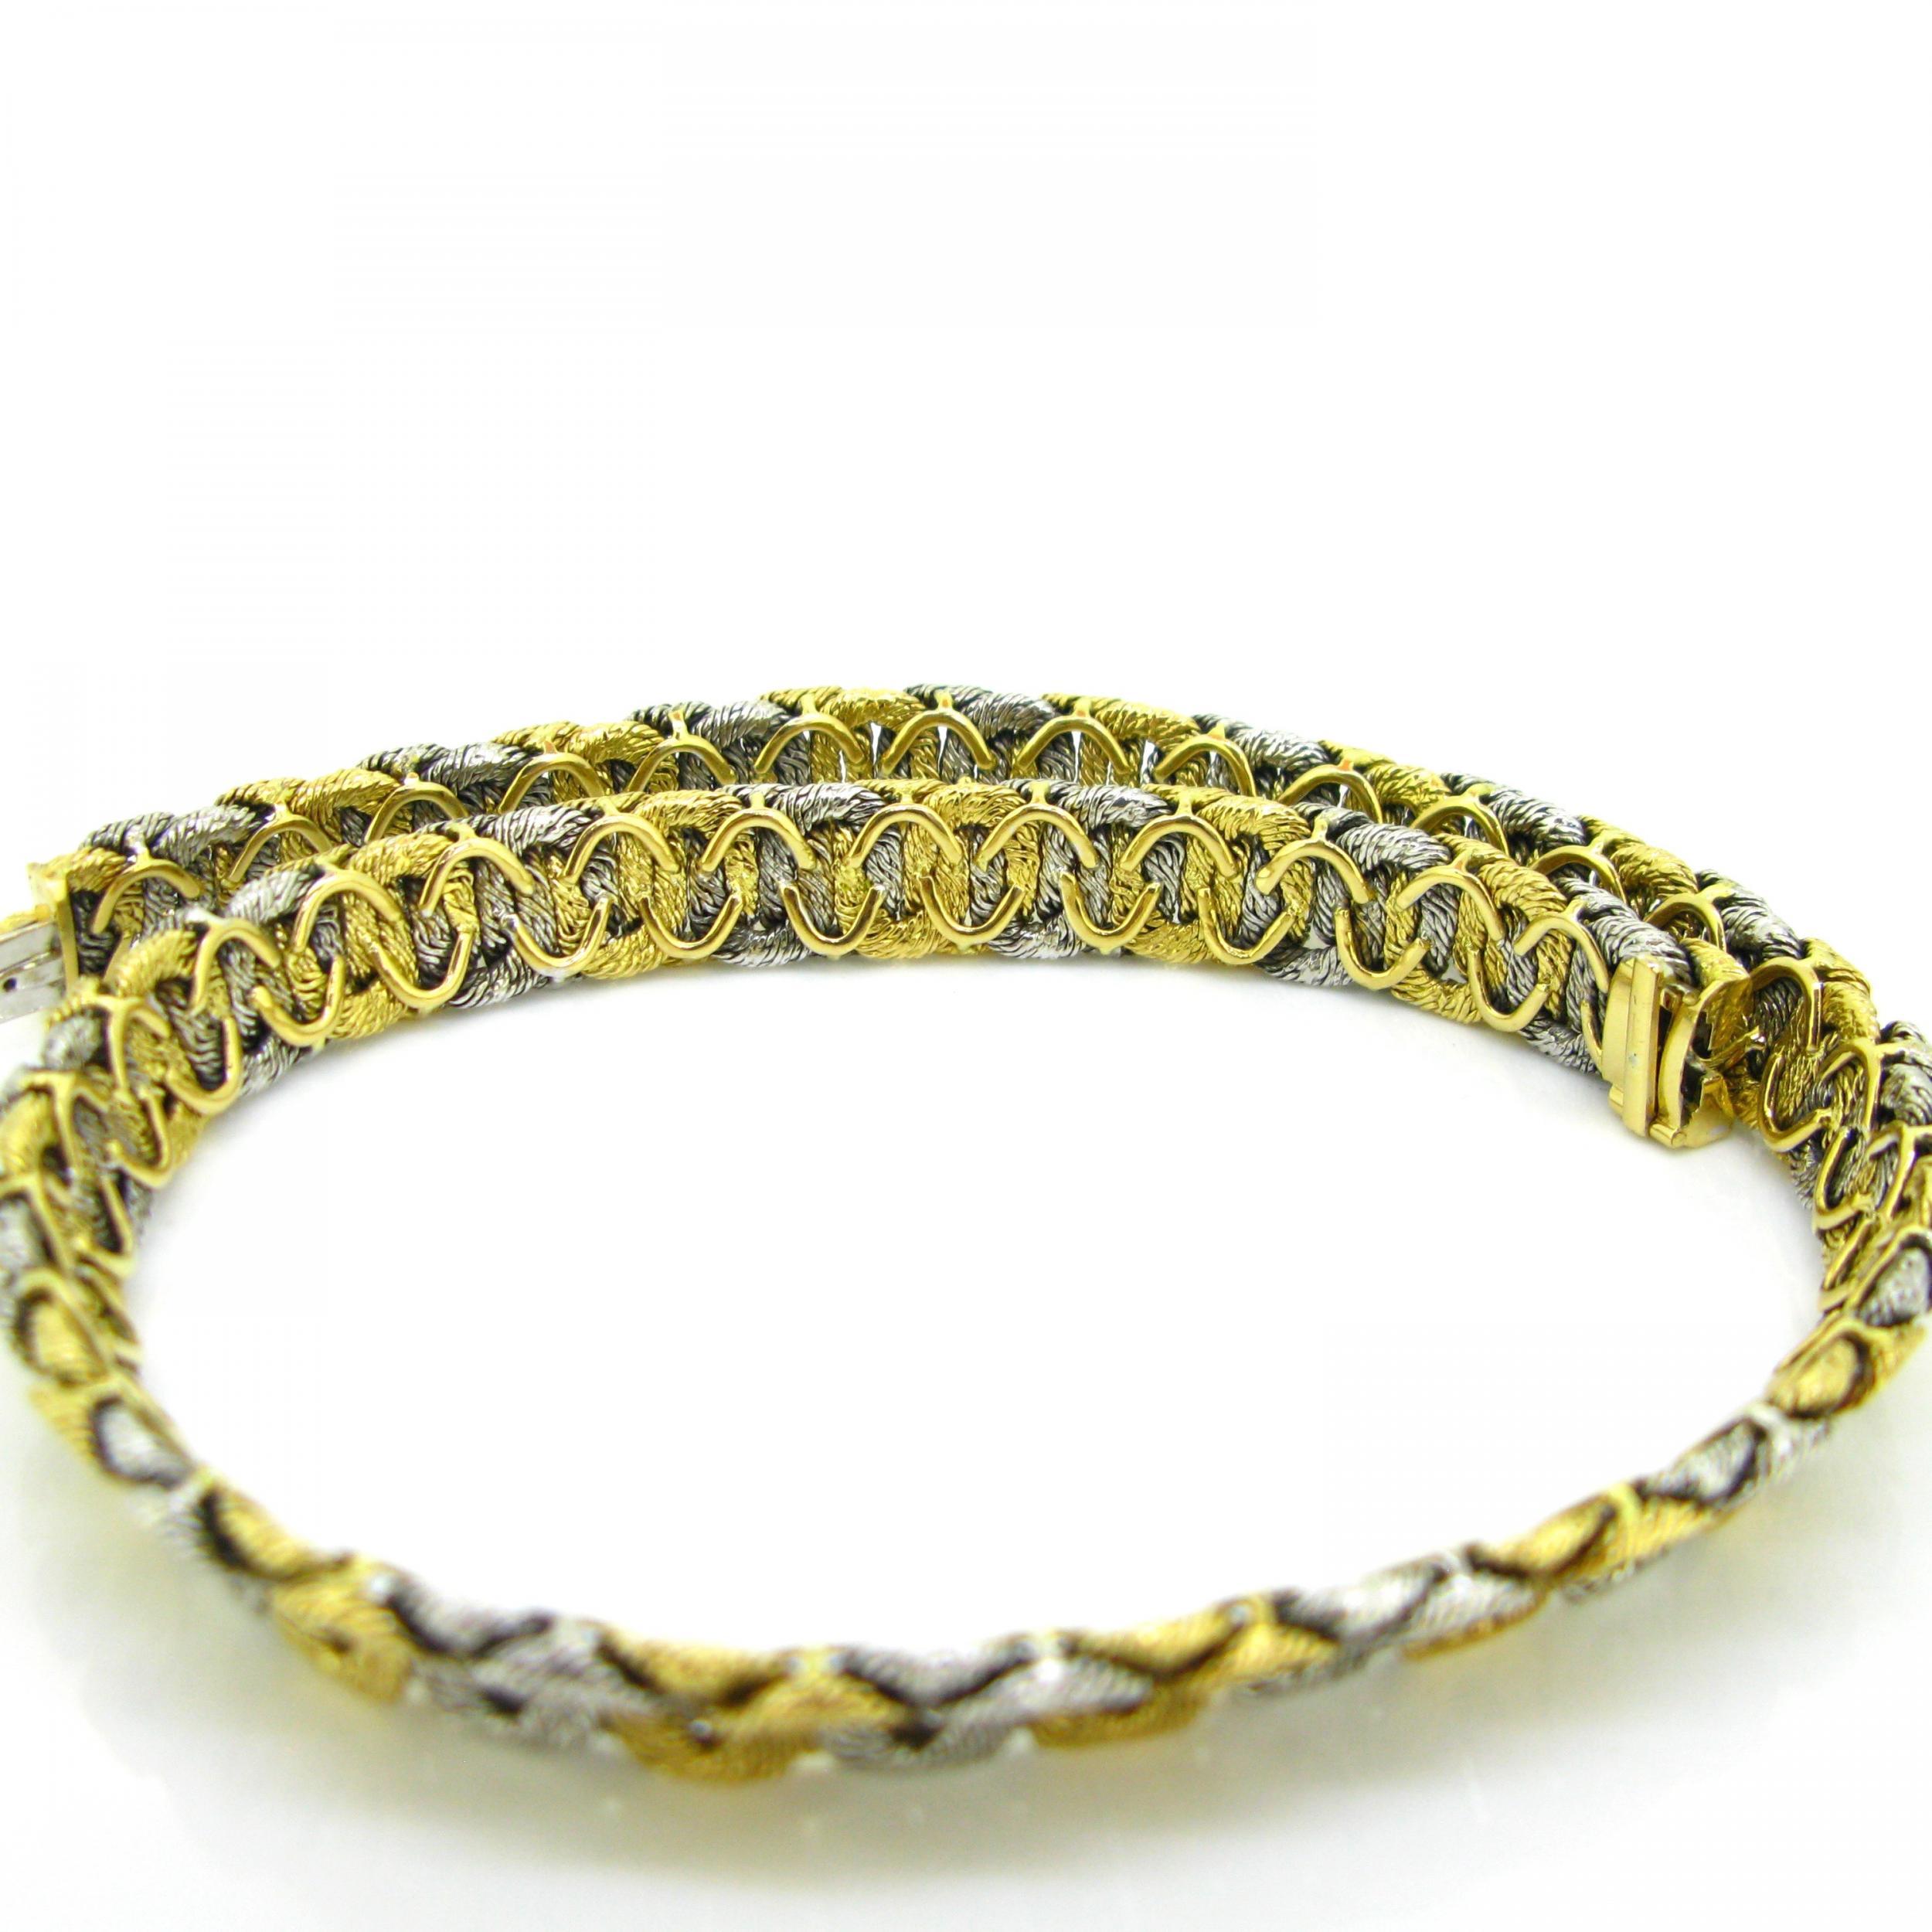 Two Tones Gold Woven Collar Necklace by Georges Lenfant, 18kt gold, France, c1965 1